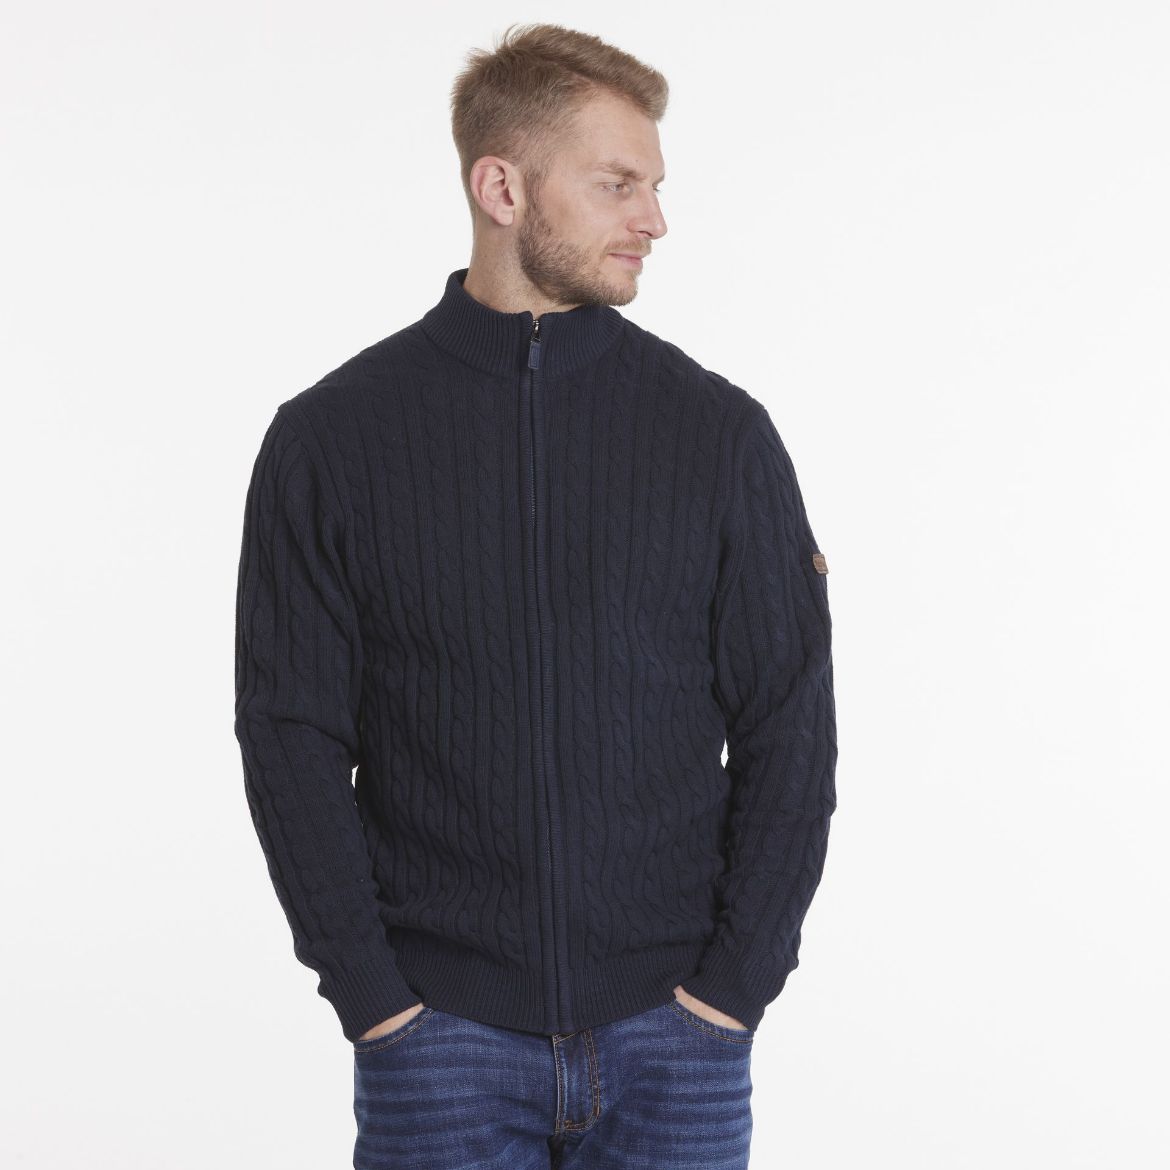 Picture of Tall Knit Cardigan, navy blue